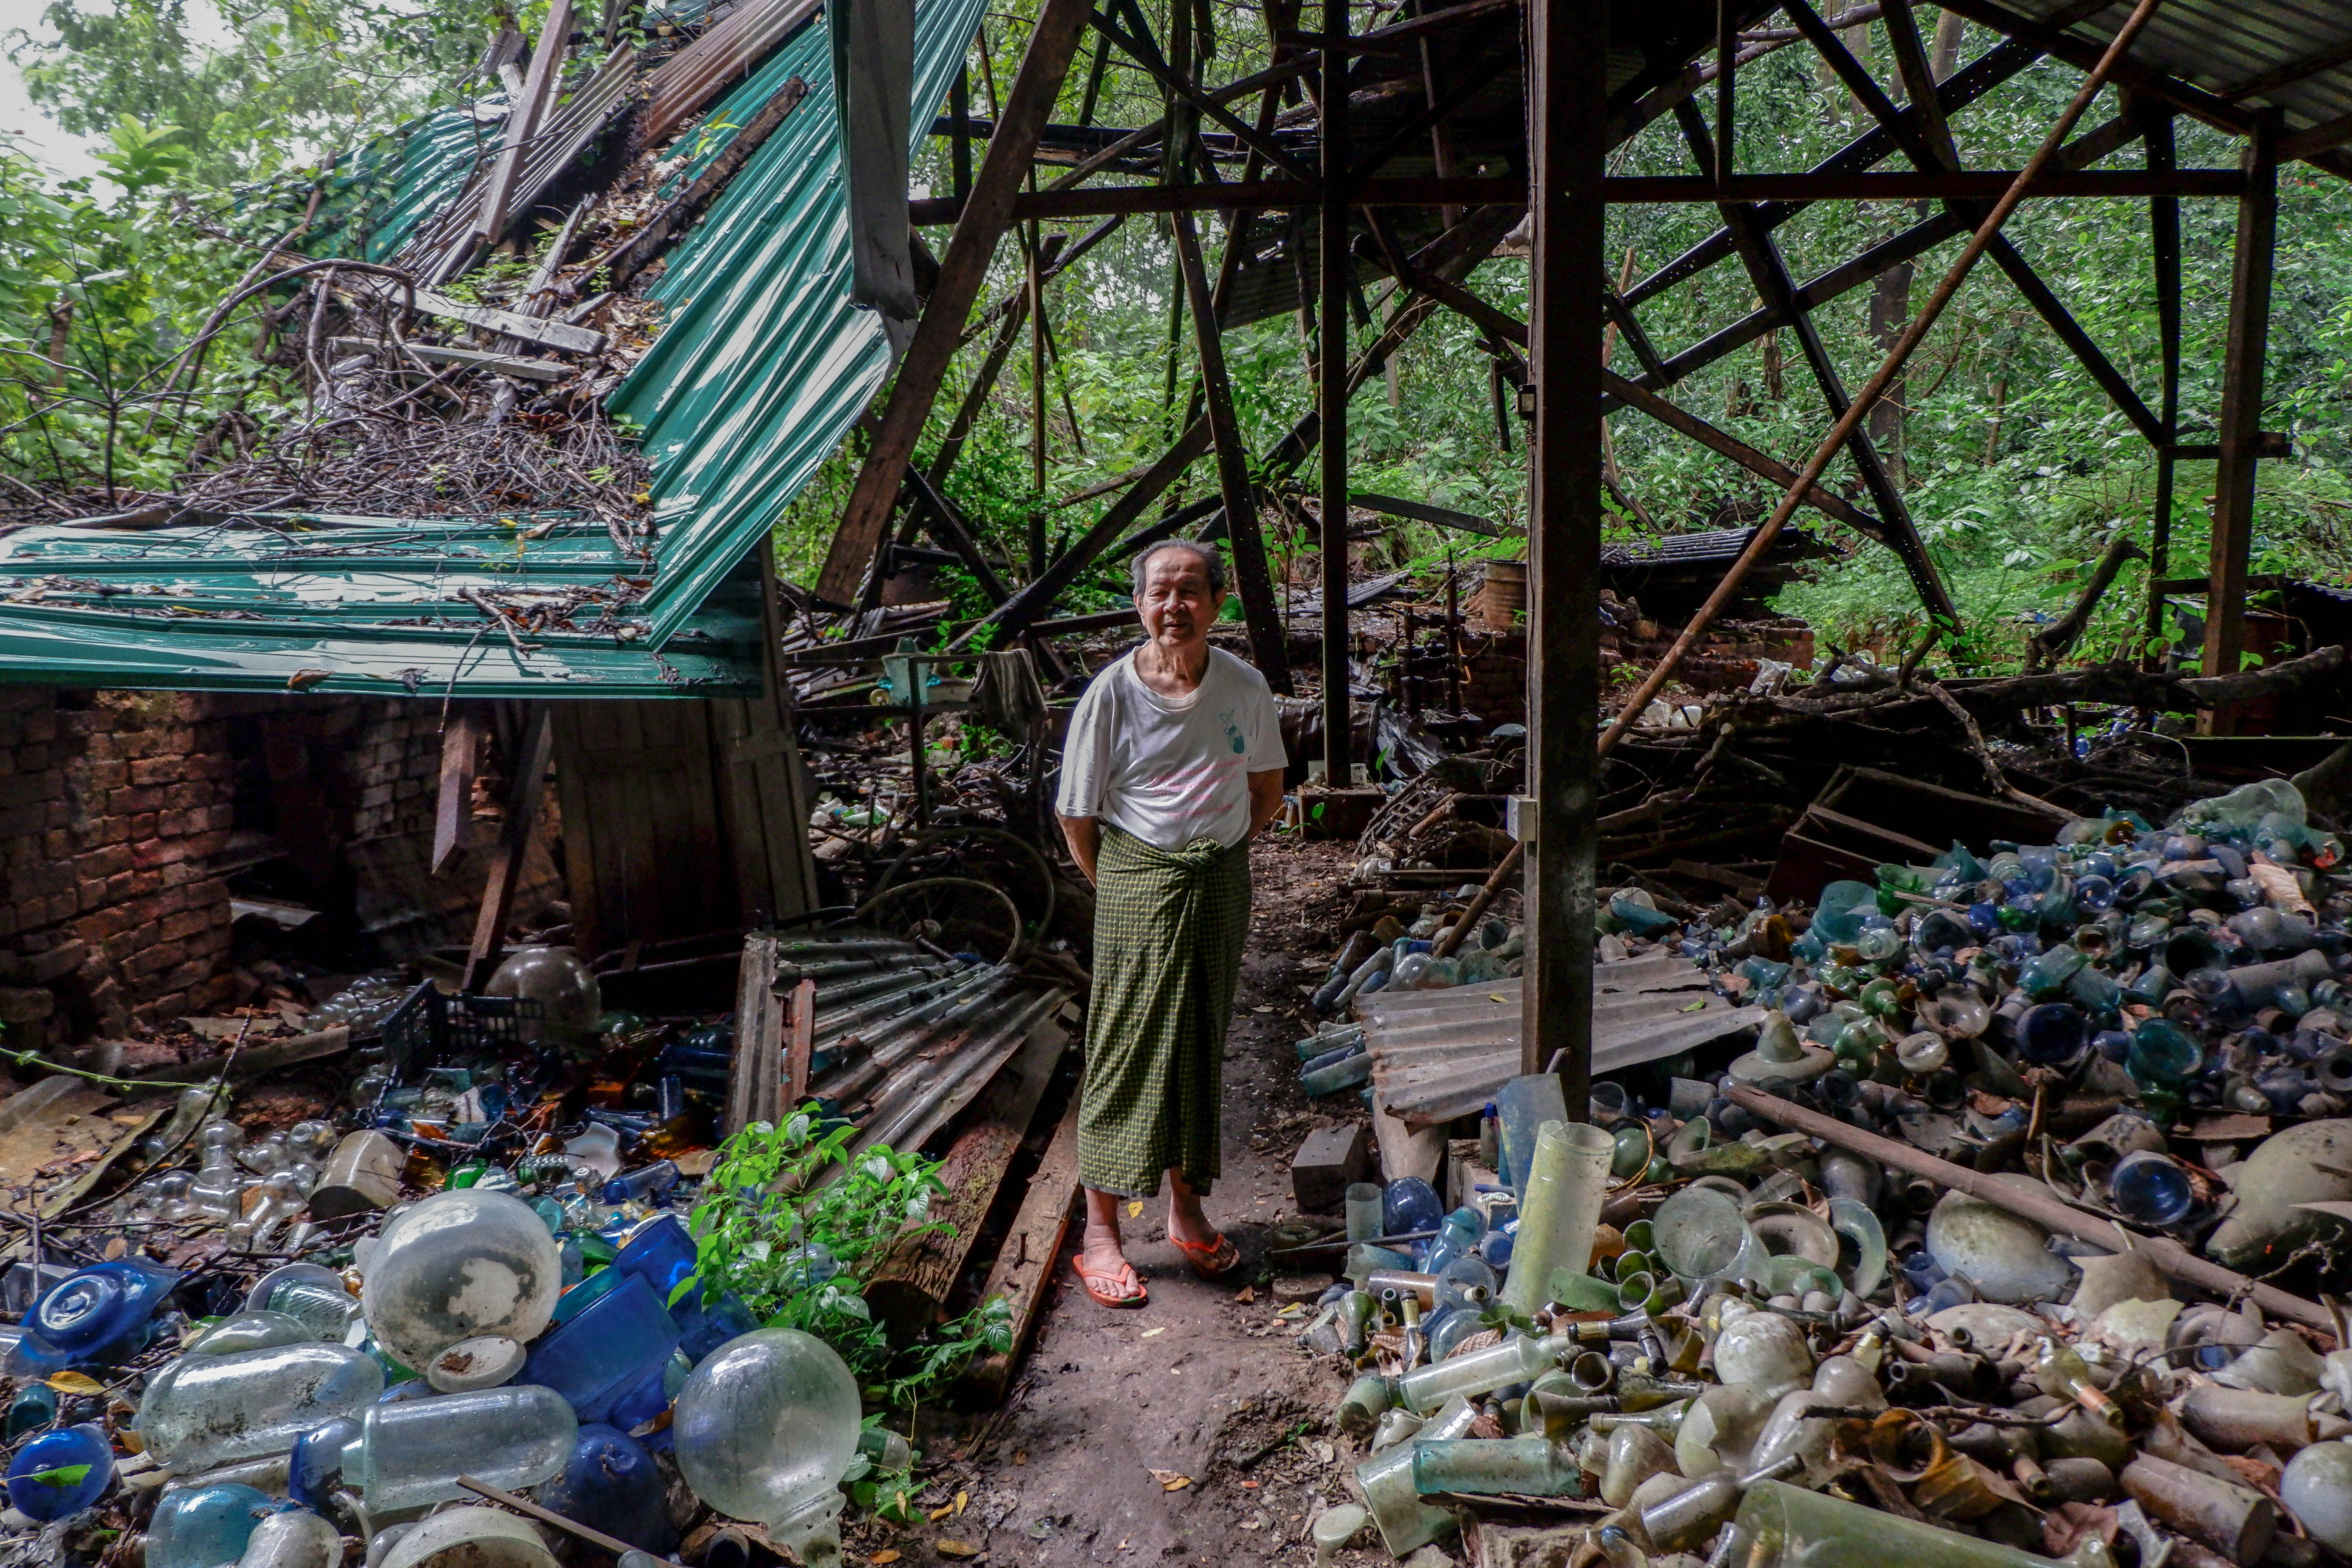 Thein Zaw, wearing a green 'longyi', white t-shirt and sandals, stands amongst the glass rubble at Nagar Glass Factory, which was destroyed by a cyclone.